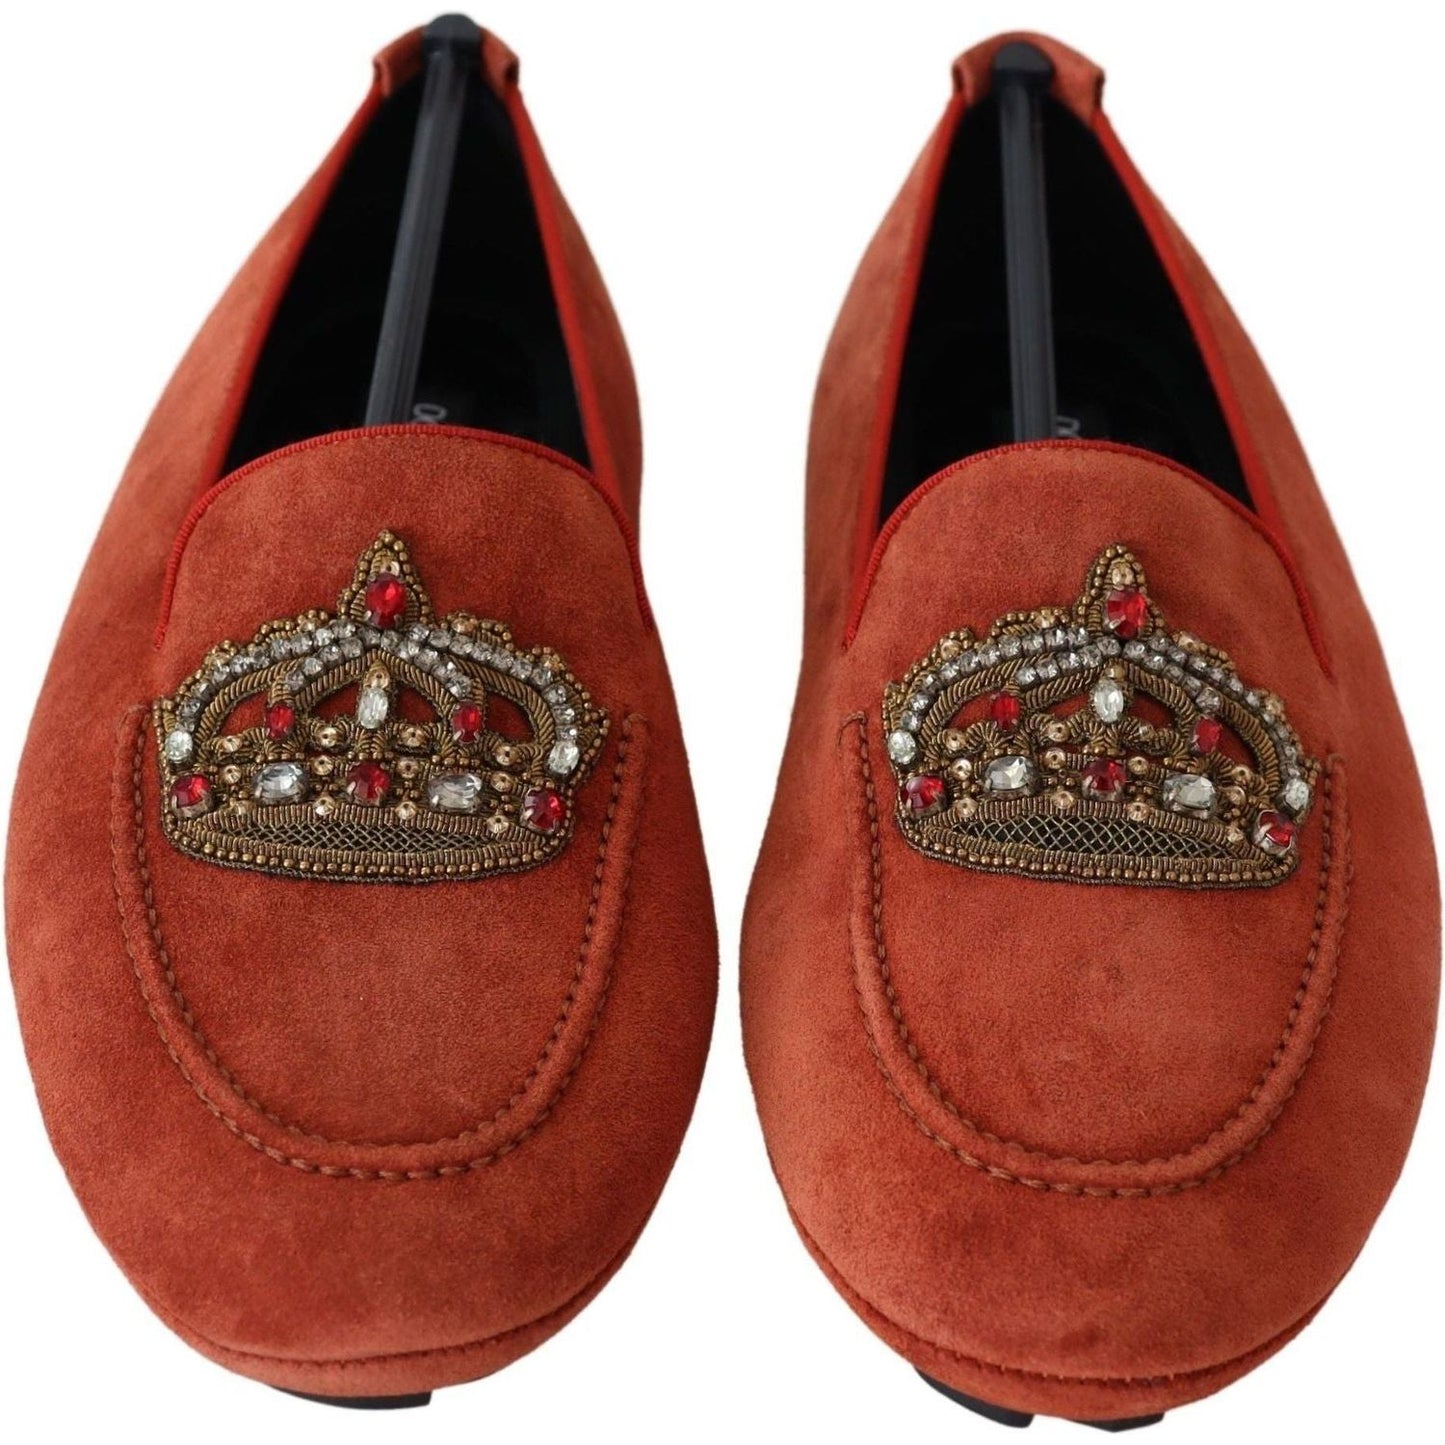 Dolce & Gabbana Opulent Orange Leather Loafers with Gold Embroidery orange-leather-crystal-crown-loafers-shoes IMG_5413-1befe4ac-b54.jpg